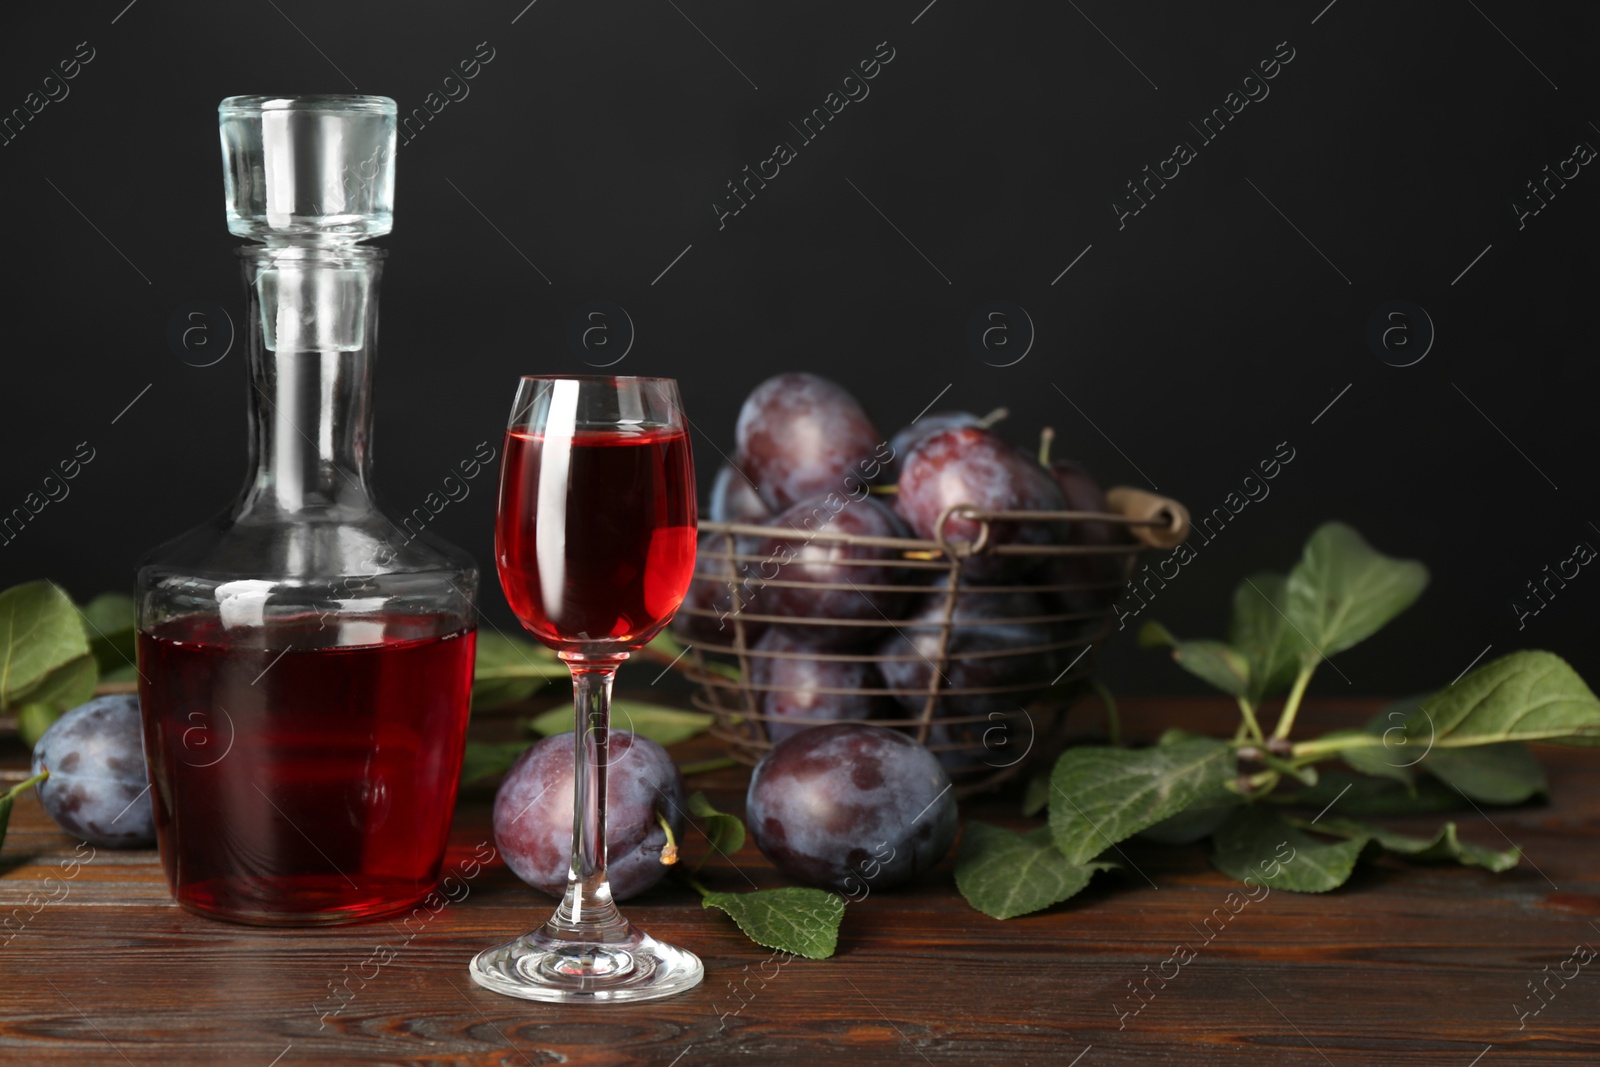 Photo of Delicious plum liquor and ripe fruits on wooden table against black background. Homemade strong alcoholic beverage